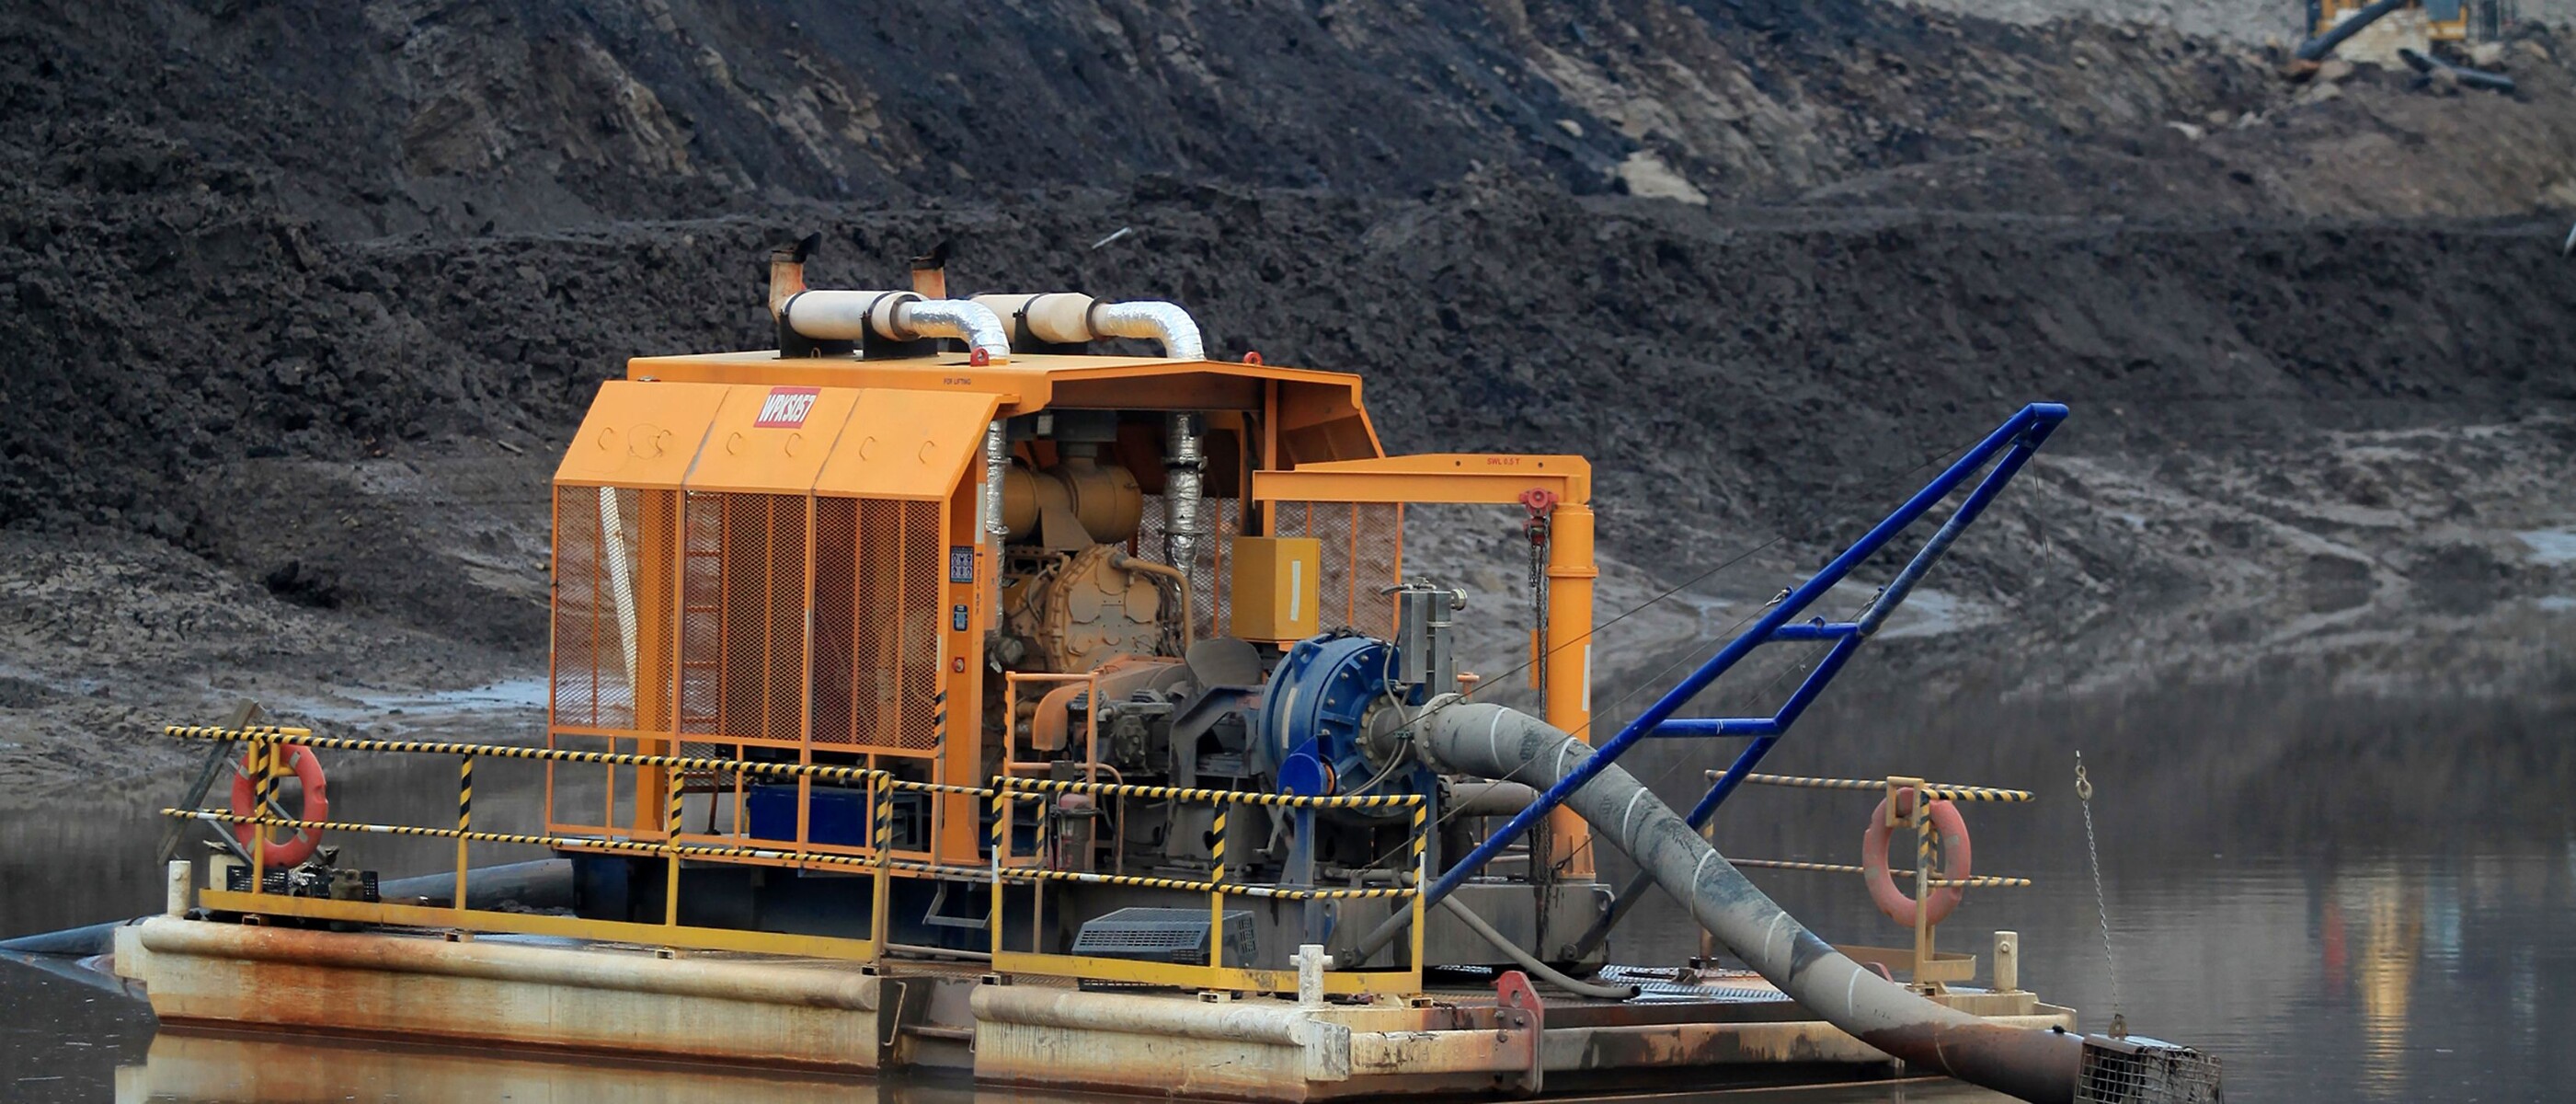 KSB dewatering and process pumps offer utmost efficiency in mining.